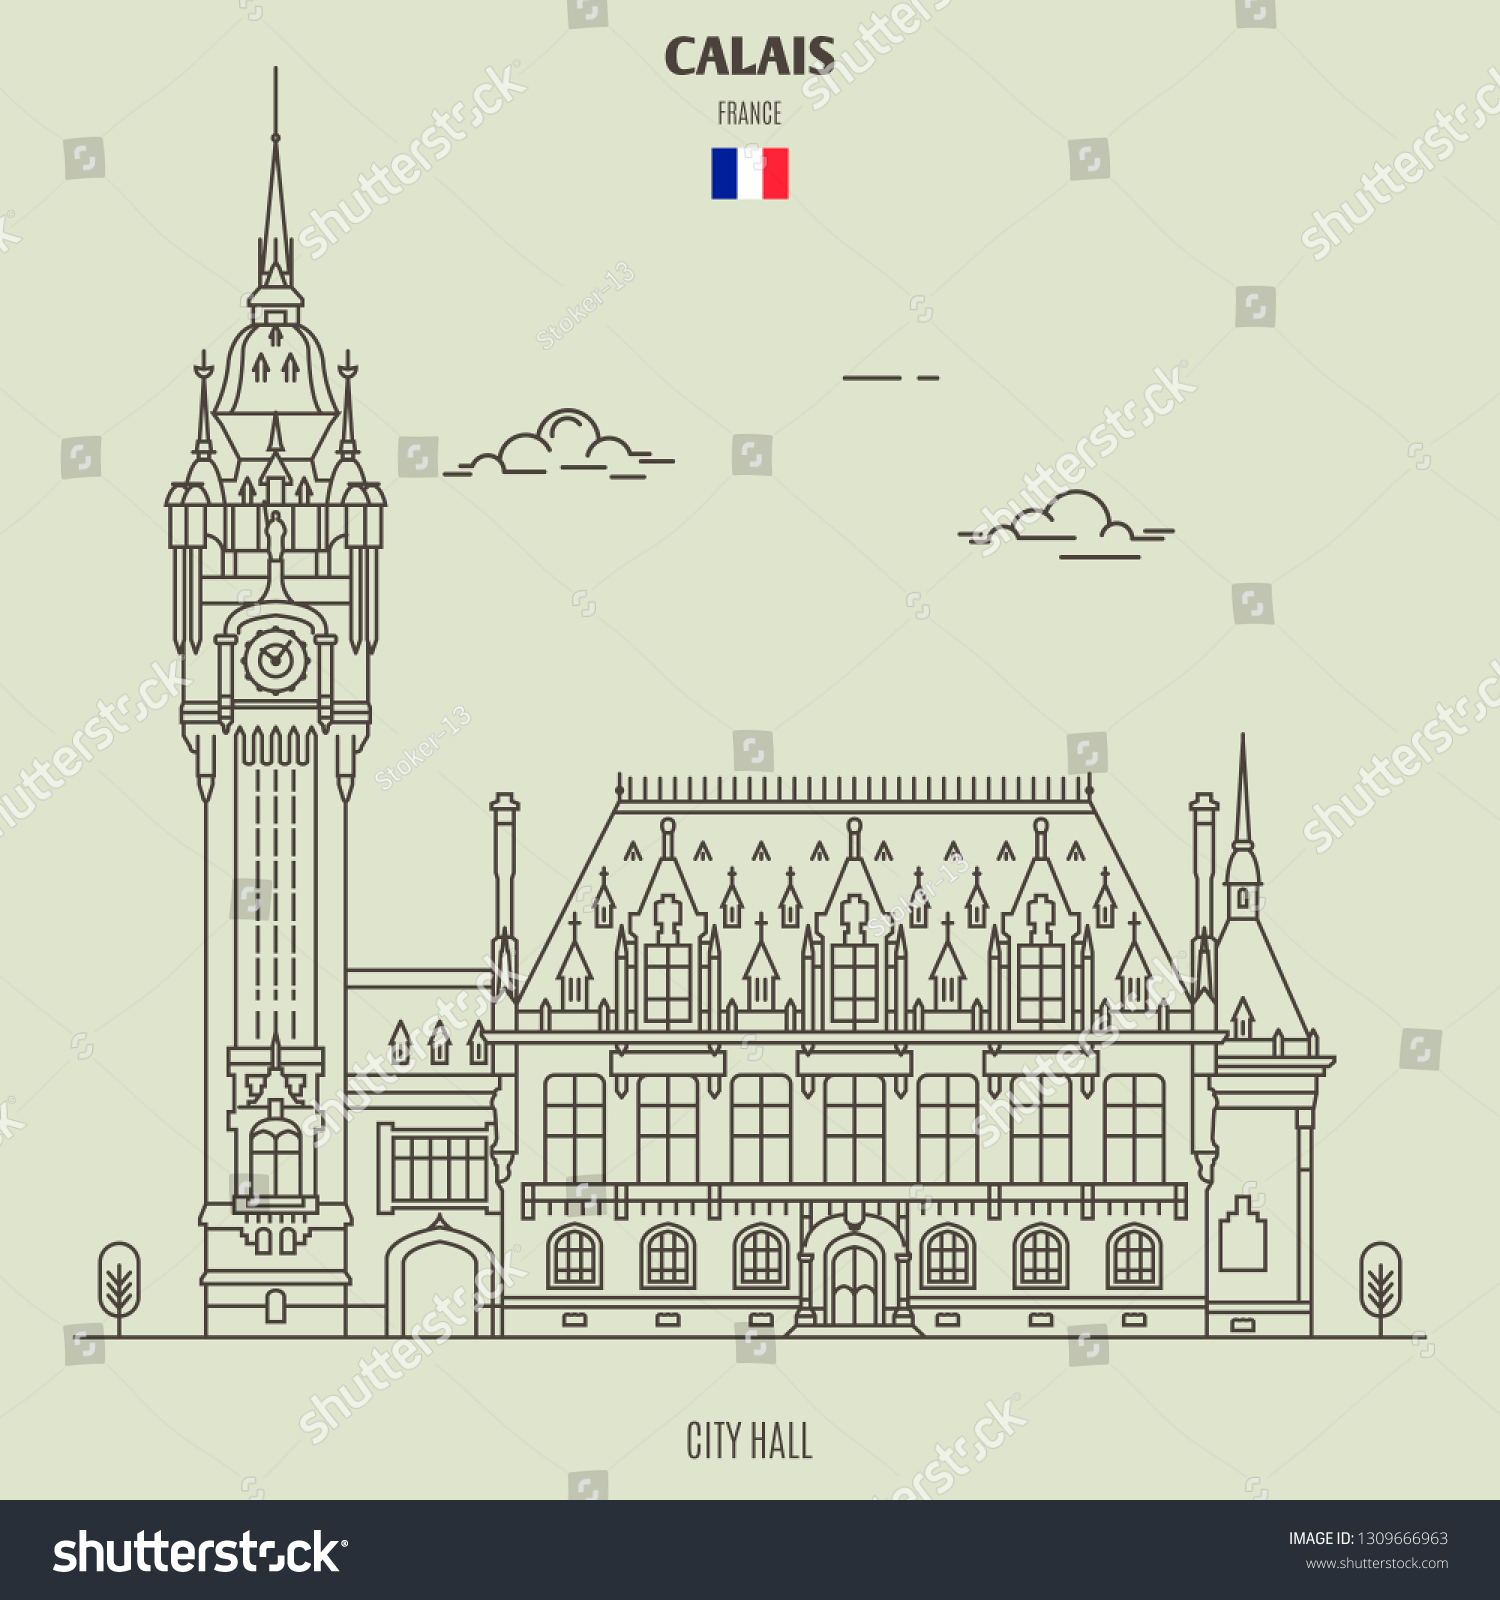 SVG of City Hall in Calais, France. Landmark icon in linear style svg